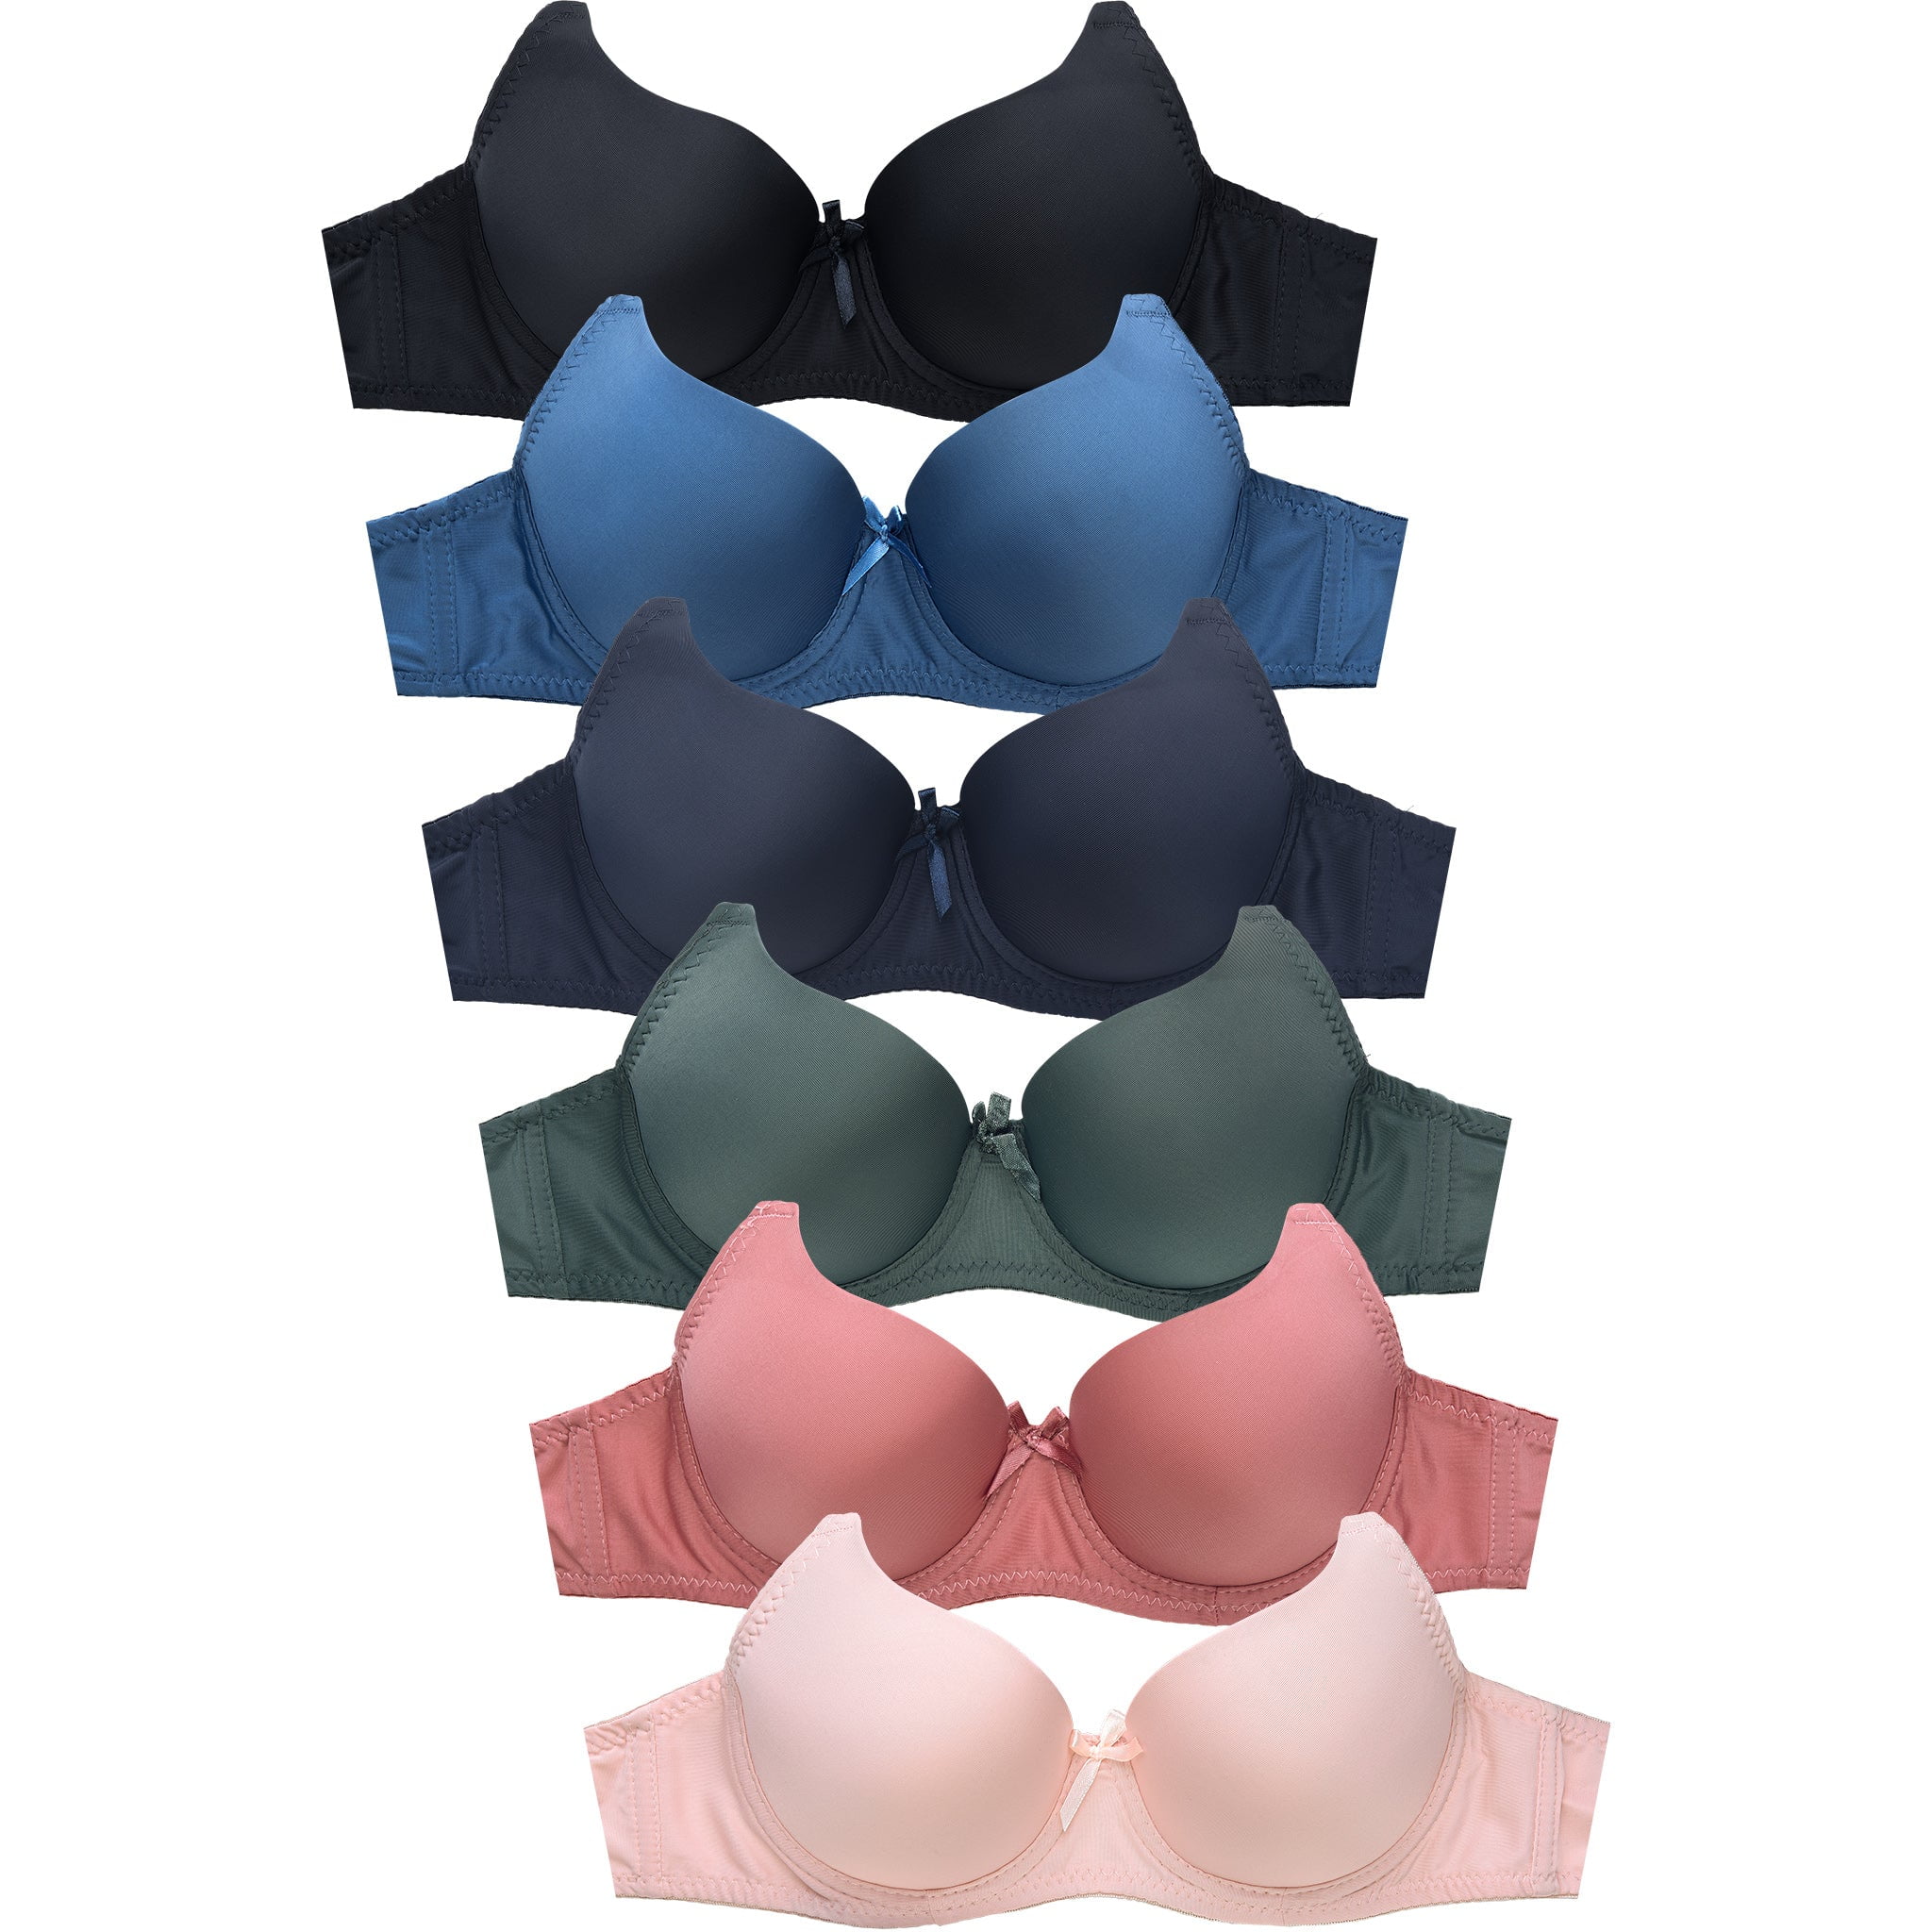 Mamia & Sofra IN-BR4207PD-40D D CupFull Coverage Bra - Size 40 - Pack of 6  